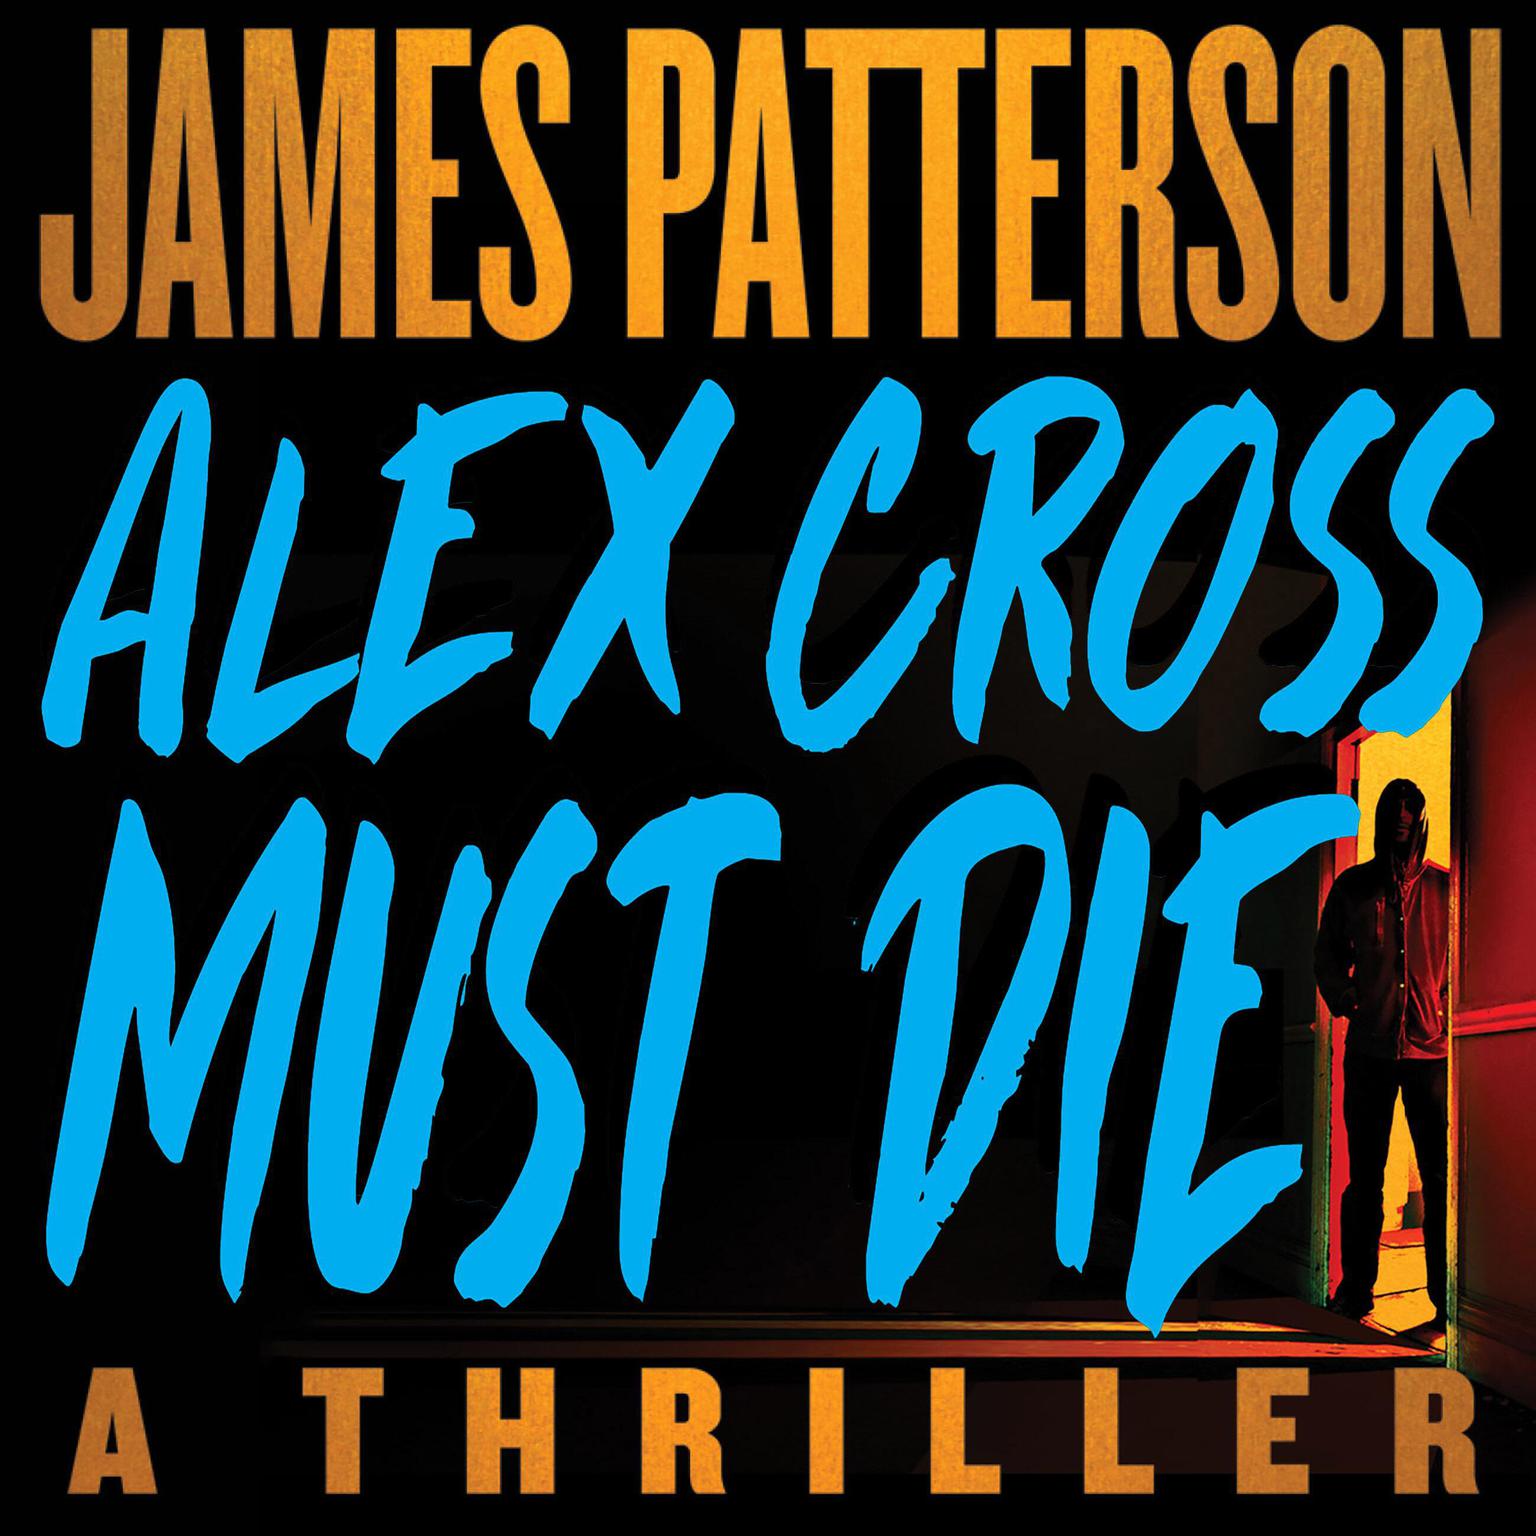 Alex Cross Must Die: A Thriller Audiobook, by James Patterson